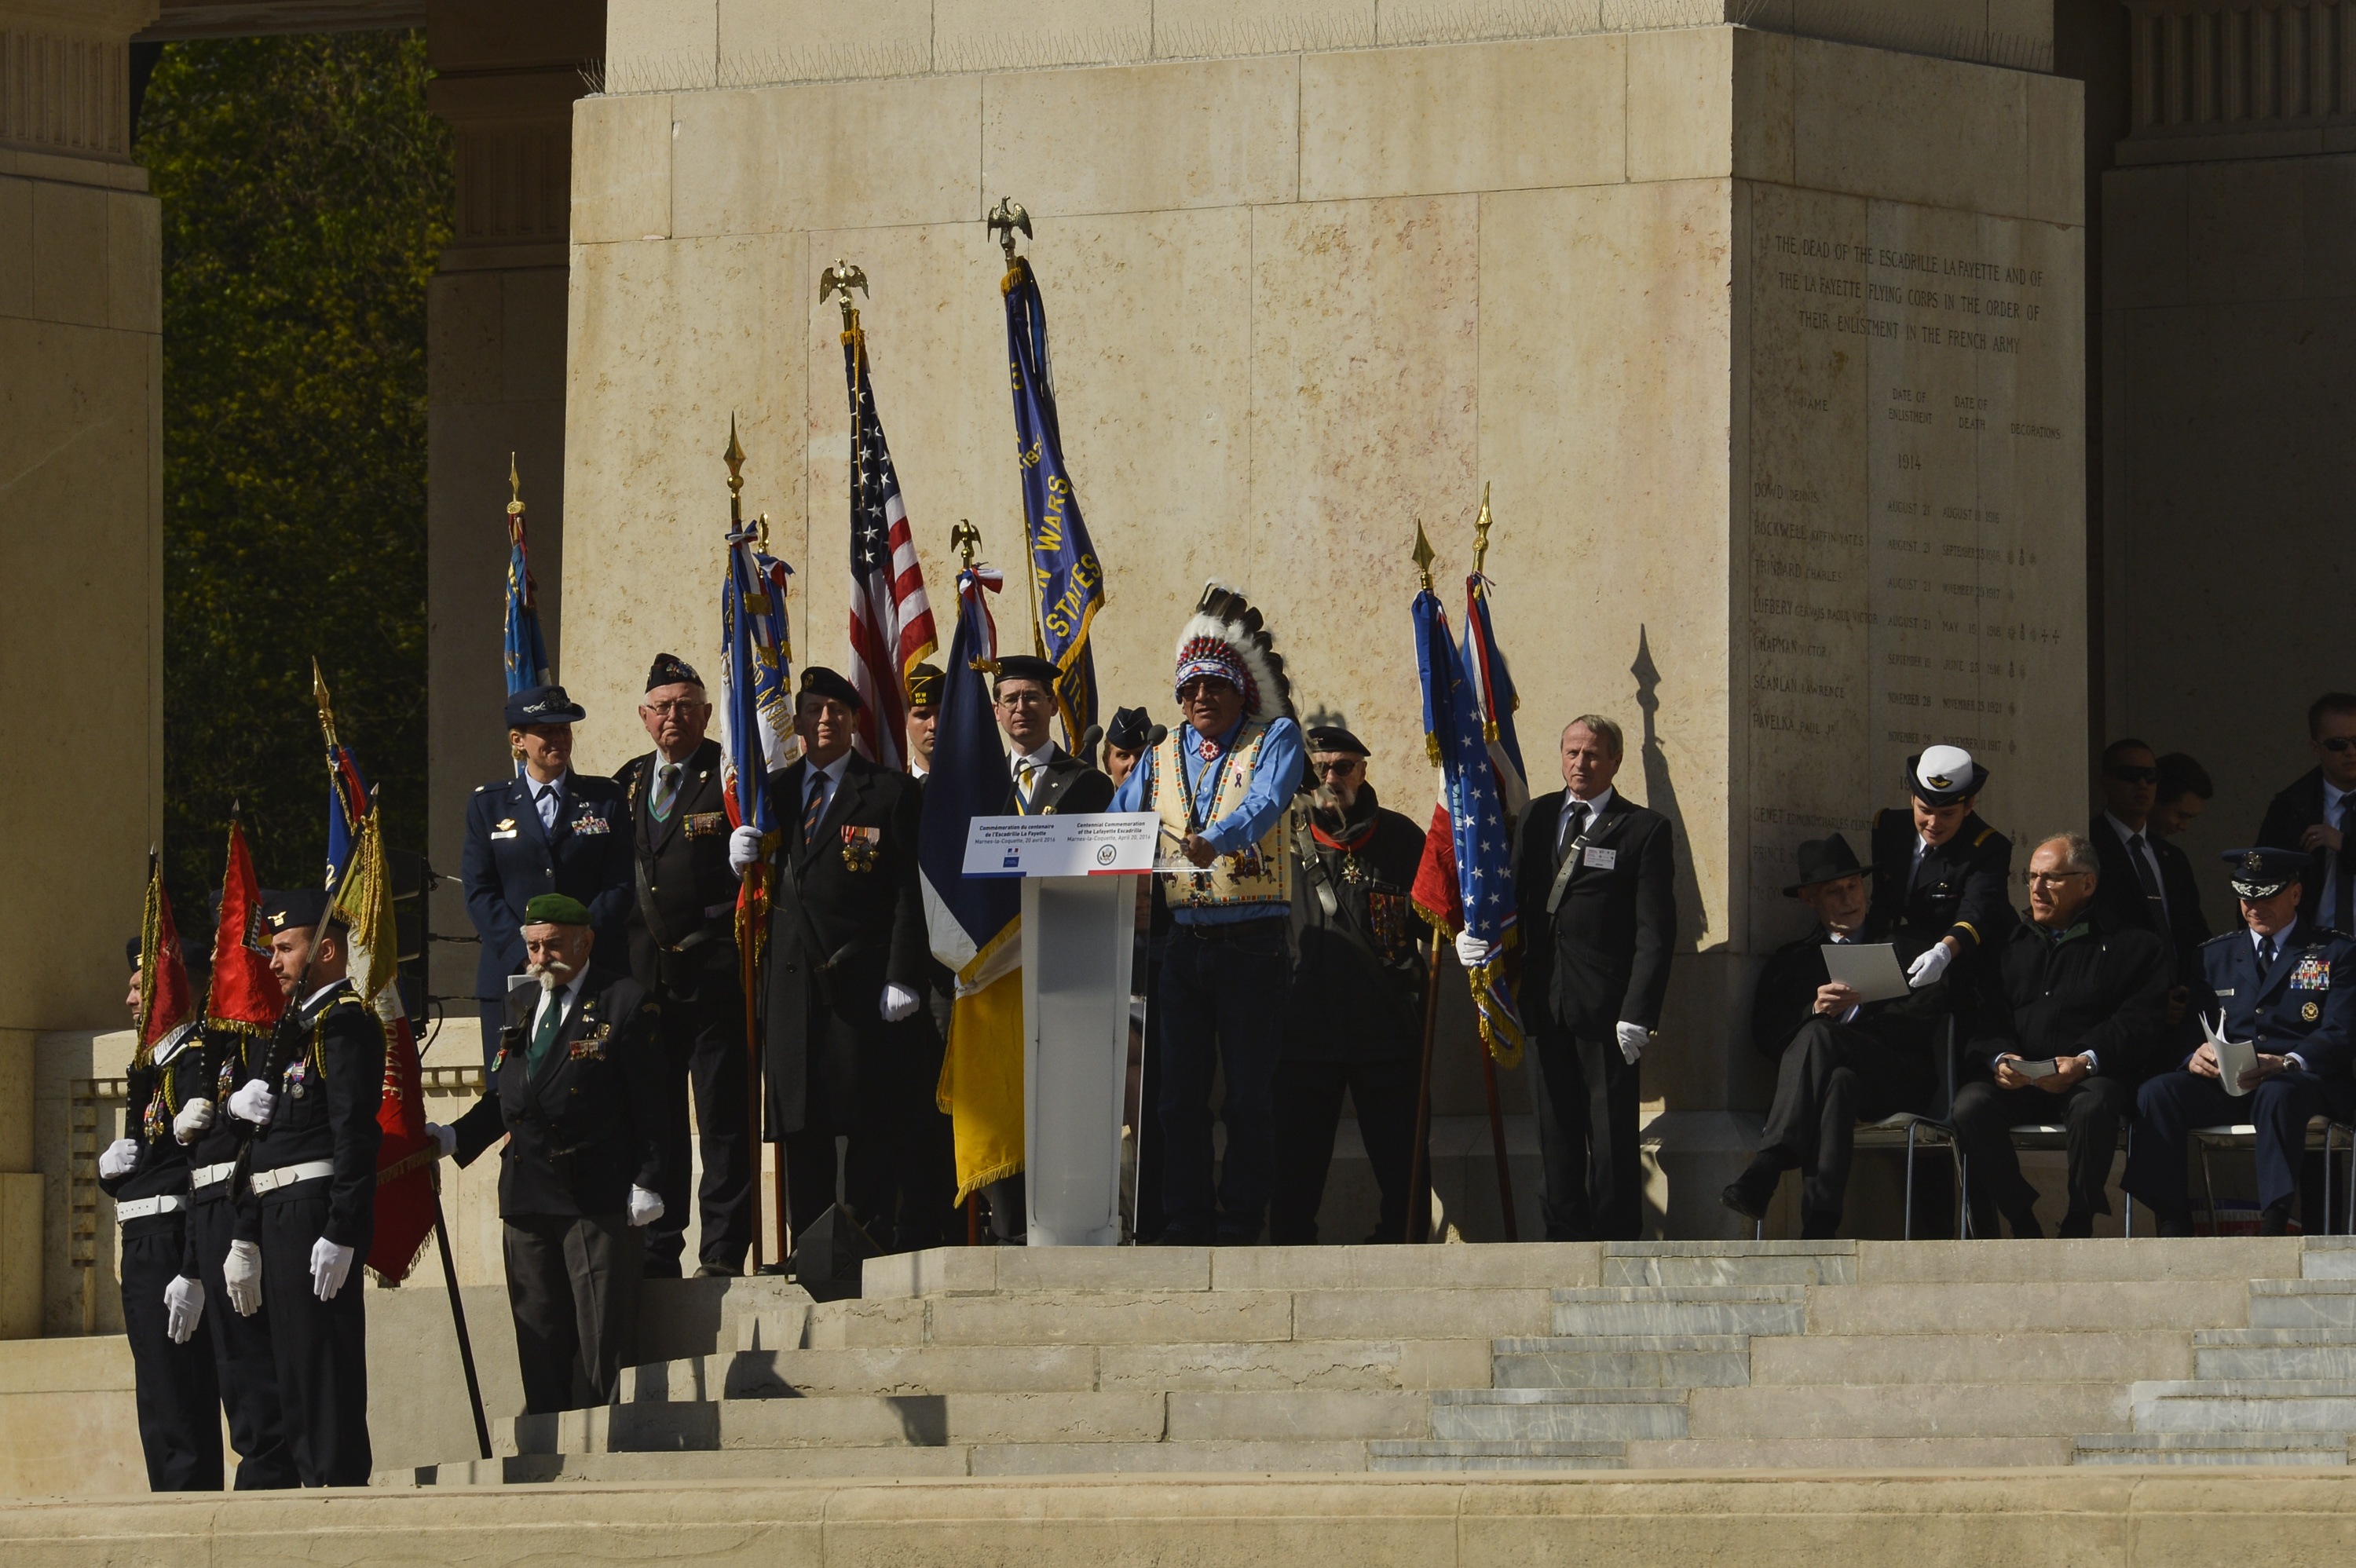 John Yellow Bird Steele, representing the Sioux Nation, offers a traditional Native American incantation during the Lafayette Escadrille Memorial 100th anniversary ceremony in Marnes-la-Coquette, France, April 20, 2016. More than 200 Americans flew with France in the Lafayette Flying Corps prior to U.S. entry into World War I. Airmen from the U.S. Air Force and their French counterparts, along with civilians from both countries attended the ceremony to honor the men who served and the sacrifices of the 68 American airmen who died fighting with the French in World War I. The memorial highlights the 238-year alliance between the U.S. and France with their long history of shared values and sacrifice. (U.S. Air Force Photo by Tech. Sgt. Joshua DeMotts/Released)